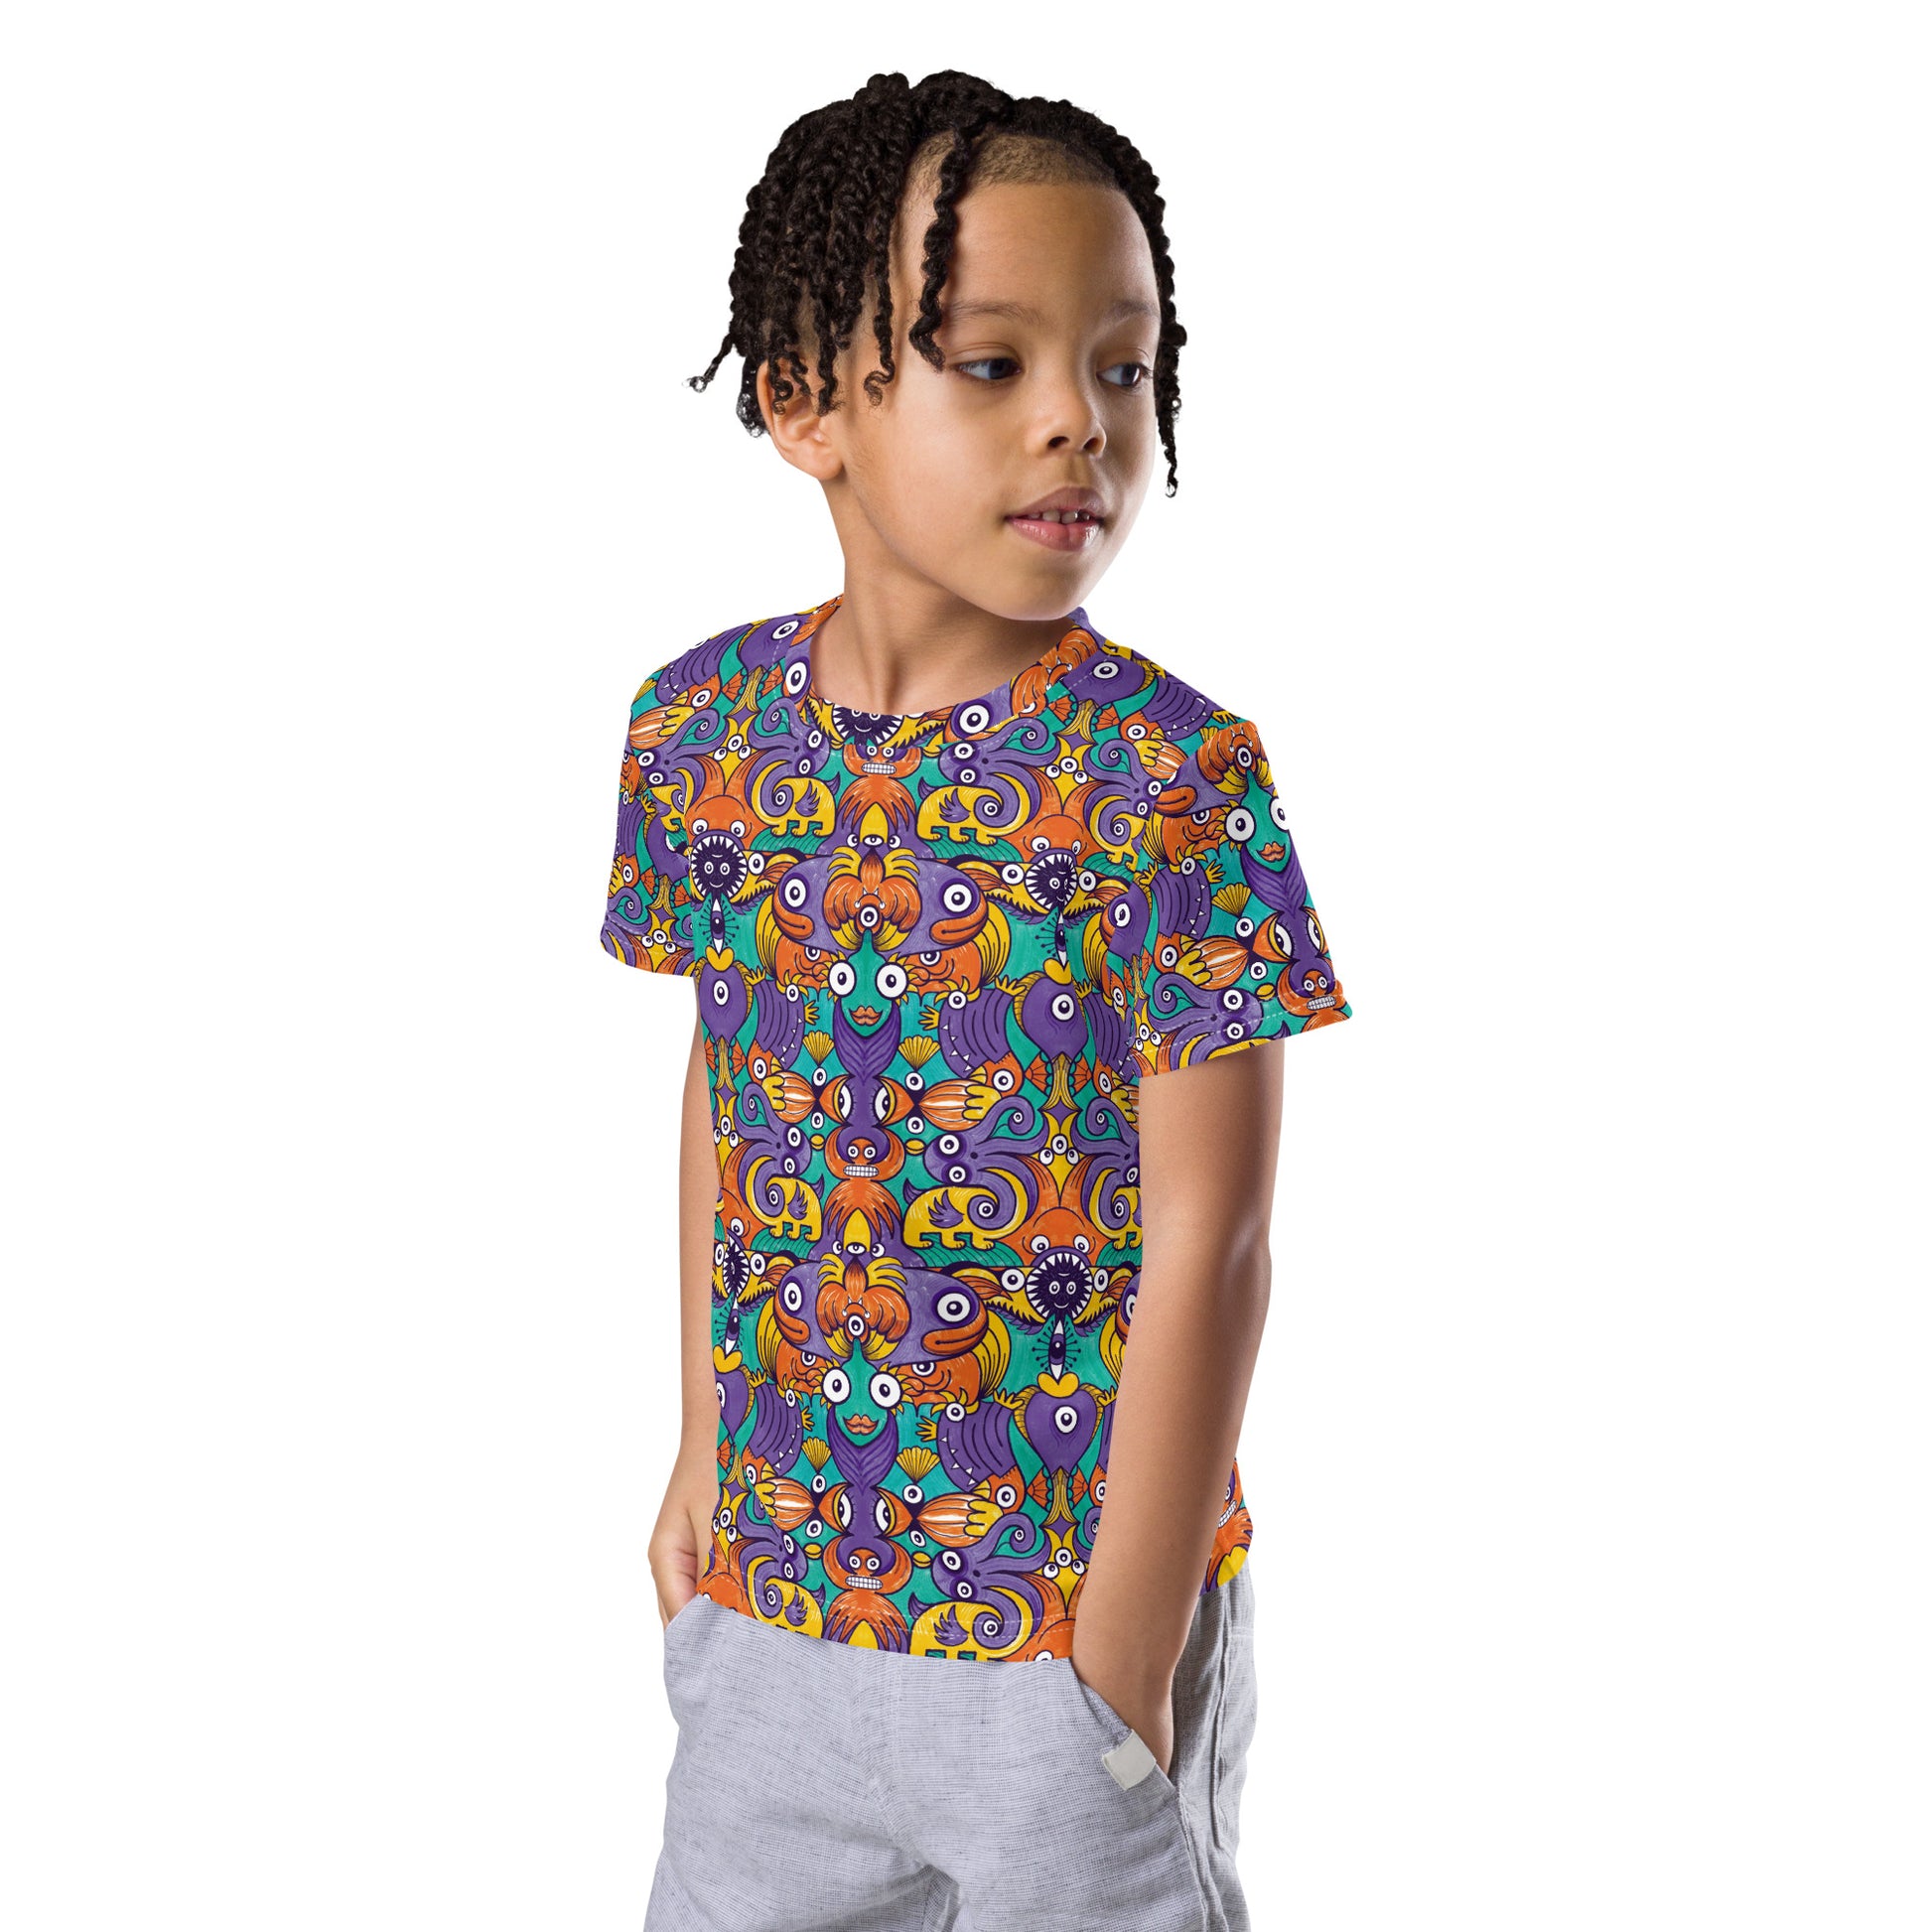 Dive into Whimsical Waters: An Undersea Odyssey - Kids crew neck t-shirt. Left side view